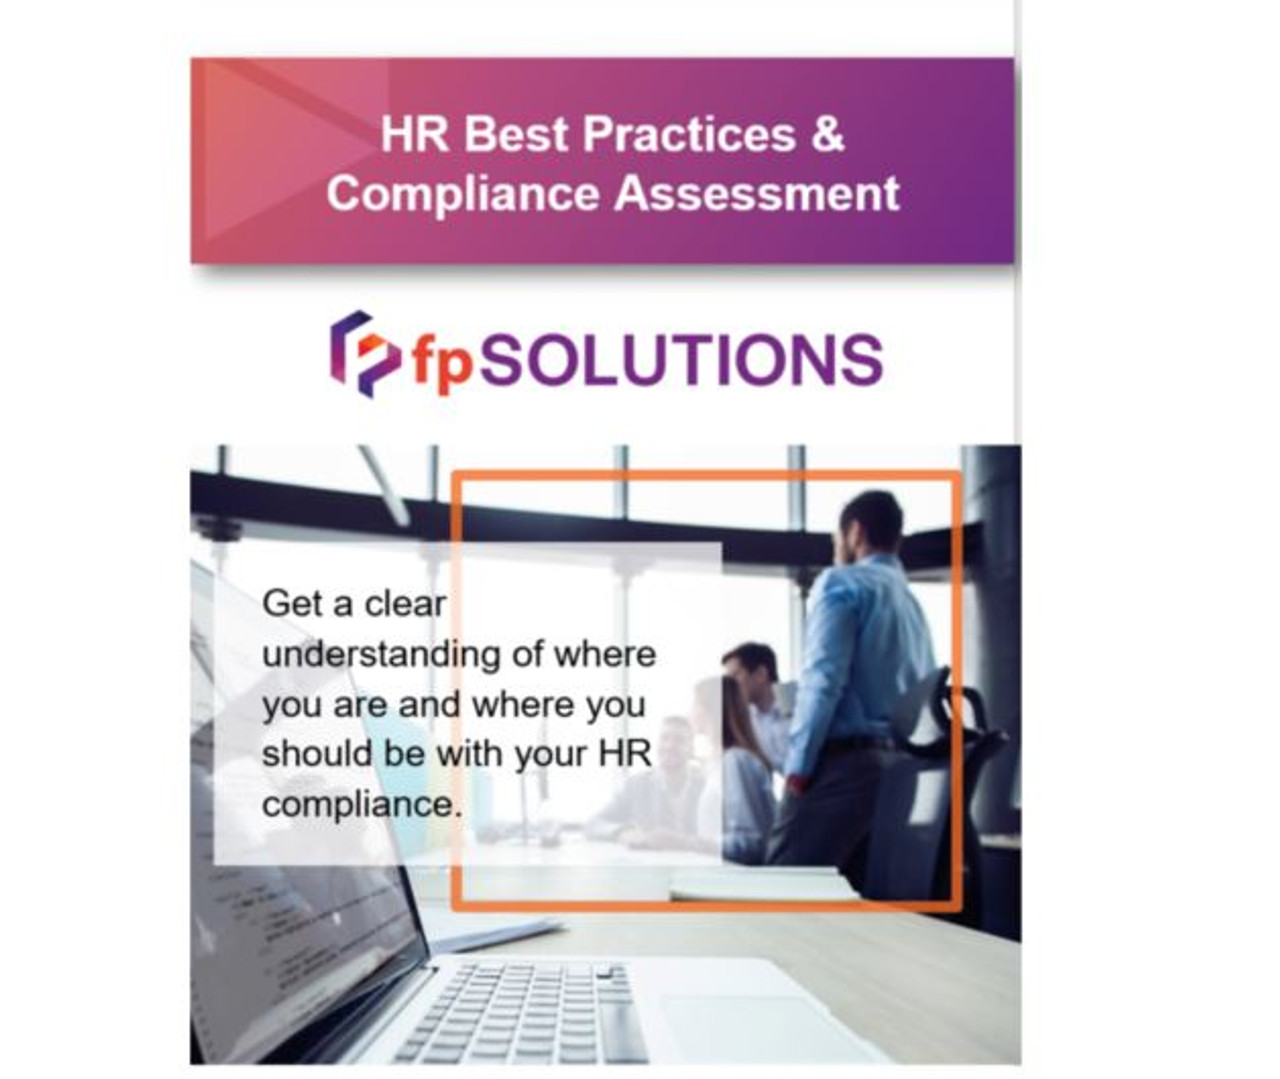 HR Best Practices and Compliance Assessments